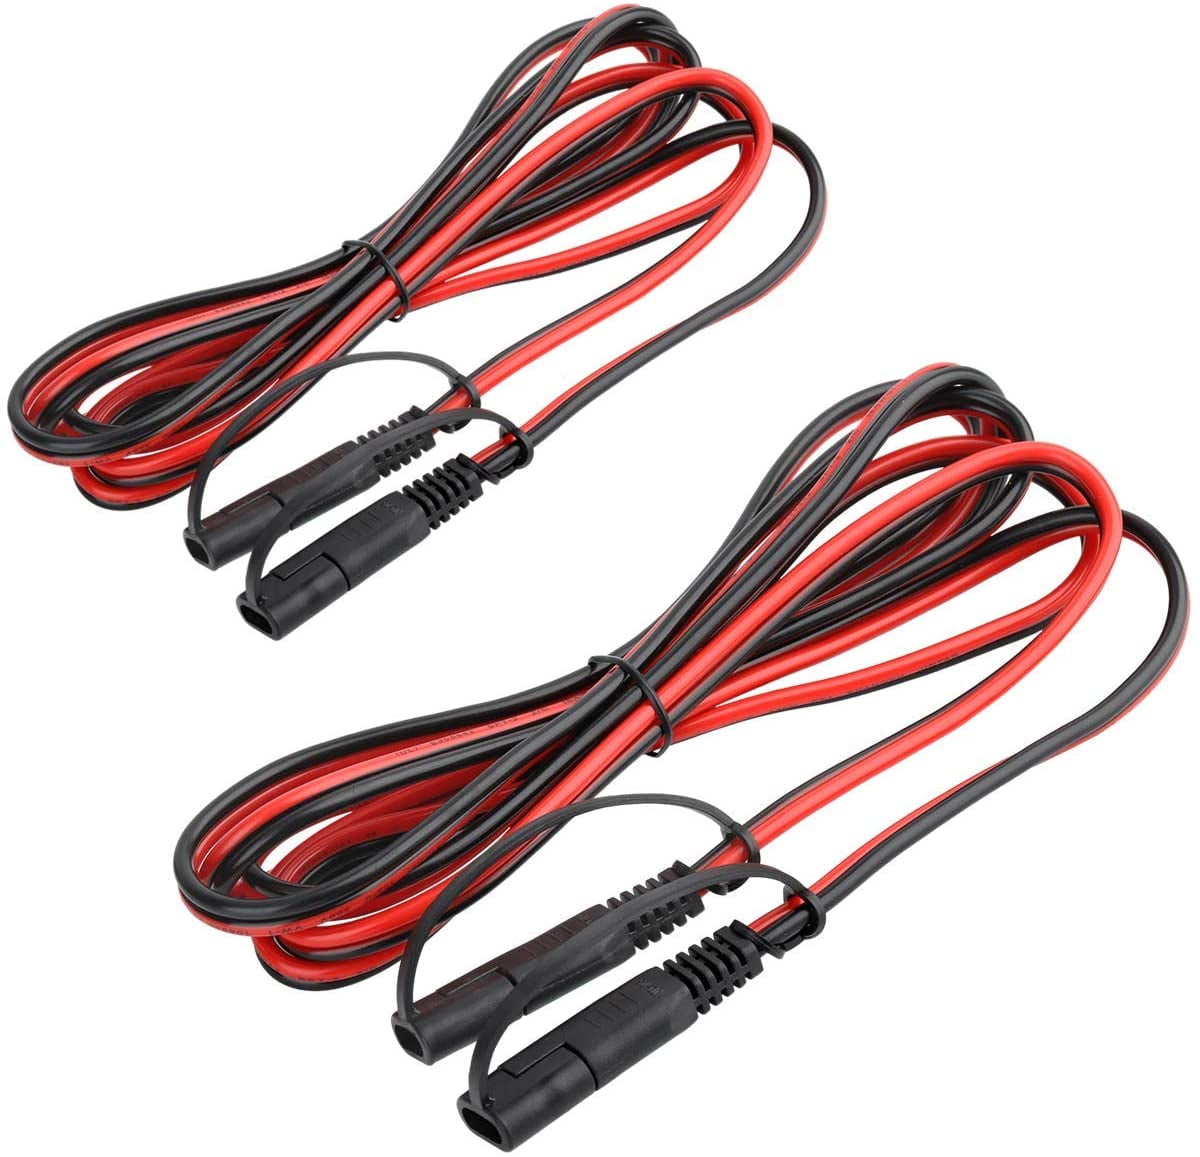 RUIZHI 2 Pack 10 AWG Automotive Extension Cable SAE to SAE 2 Pin Connector Wire Harness with Waterproof Cap for Motorcycles Cars Tractors